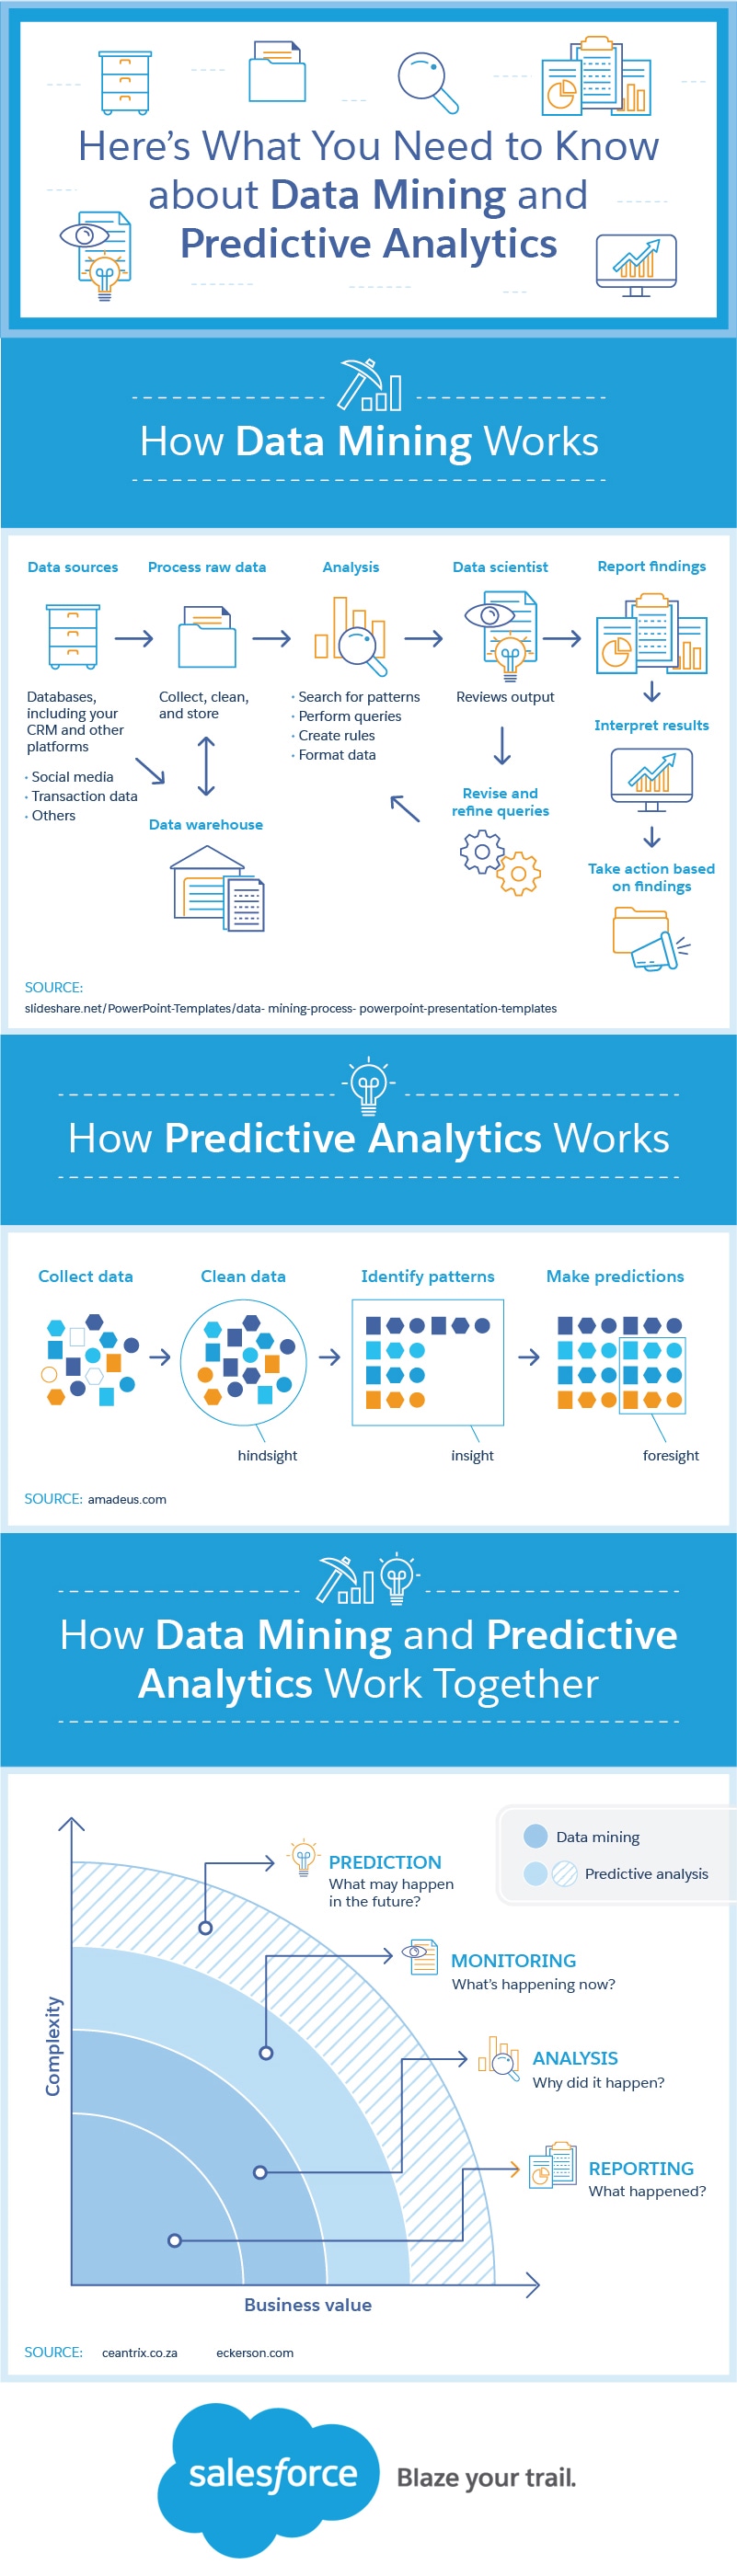 Here’s What You Need to Know about Data Mining and Predictive Analytics